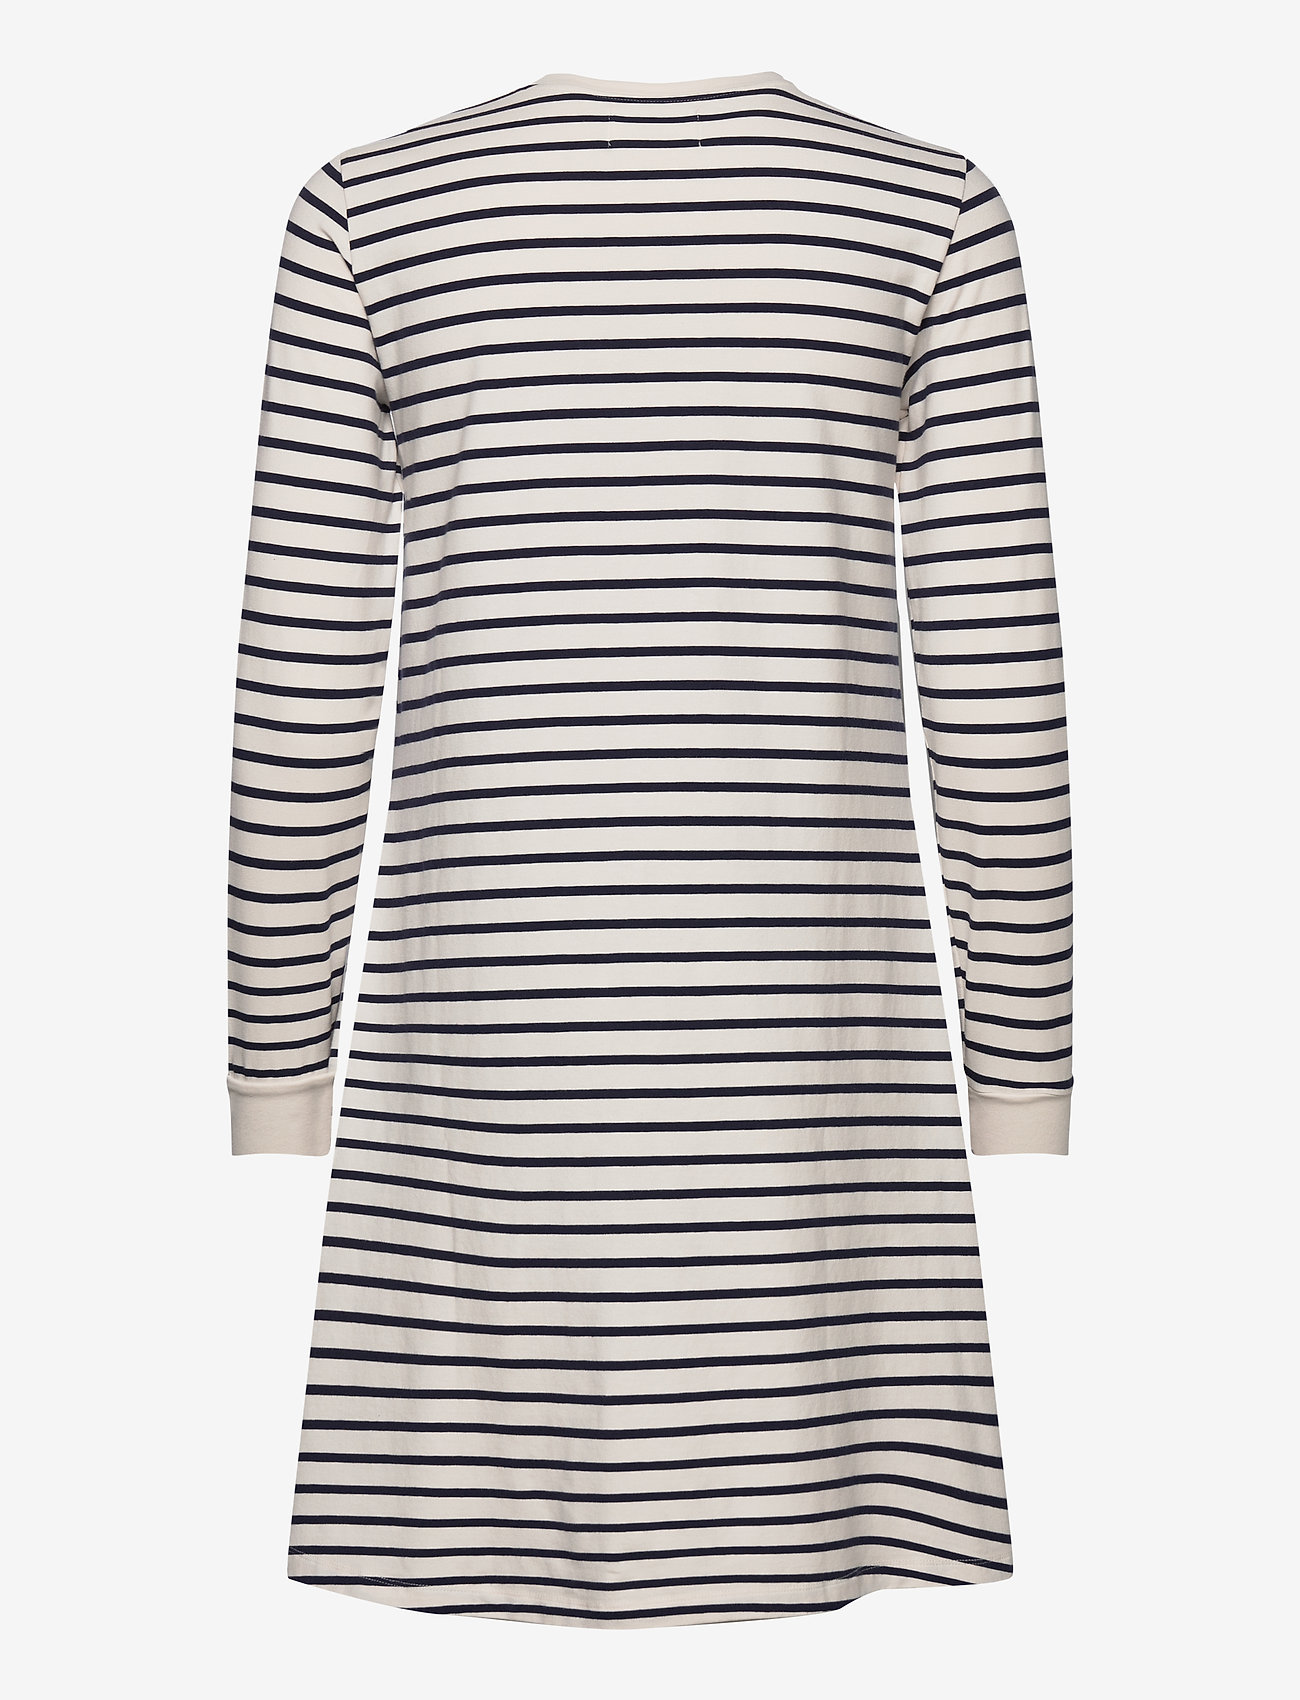 Double A by Wood Wood - Isa dress - sweatshirt-kleider - off-white/navy stripes - 1